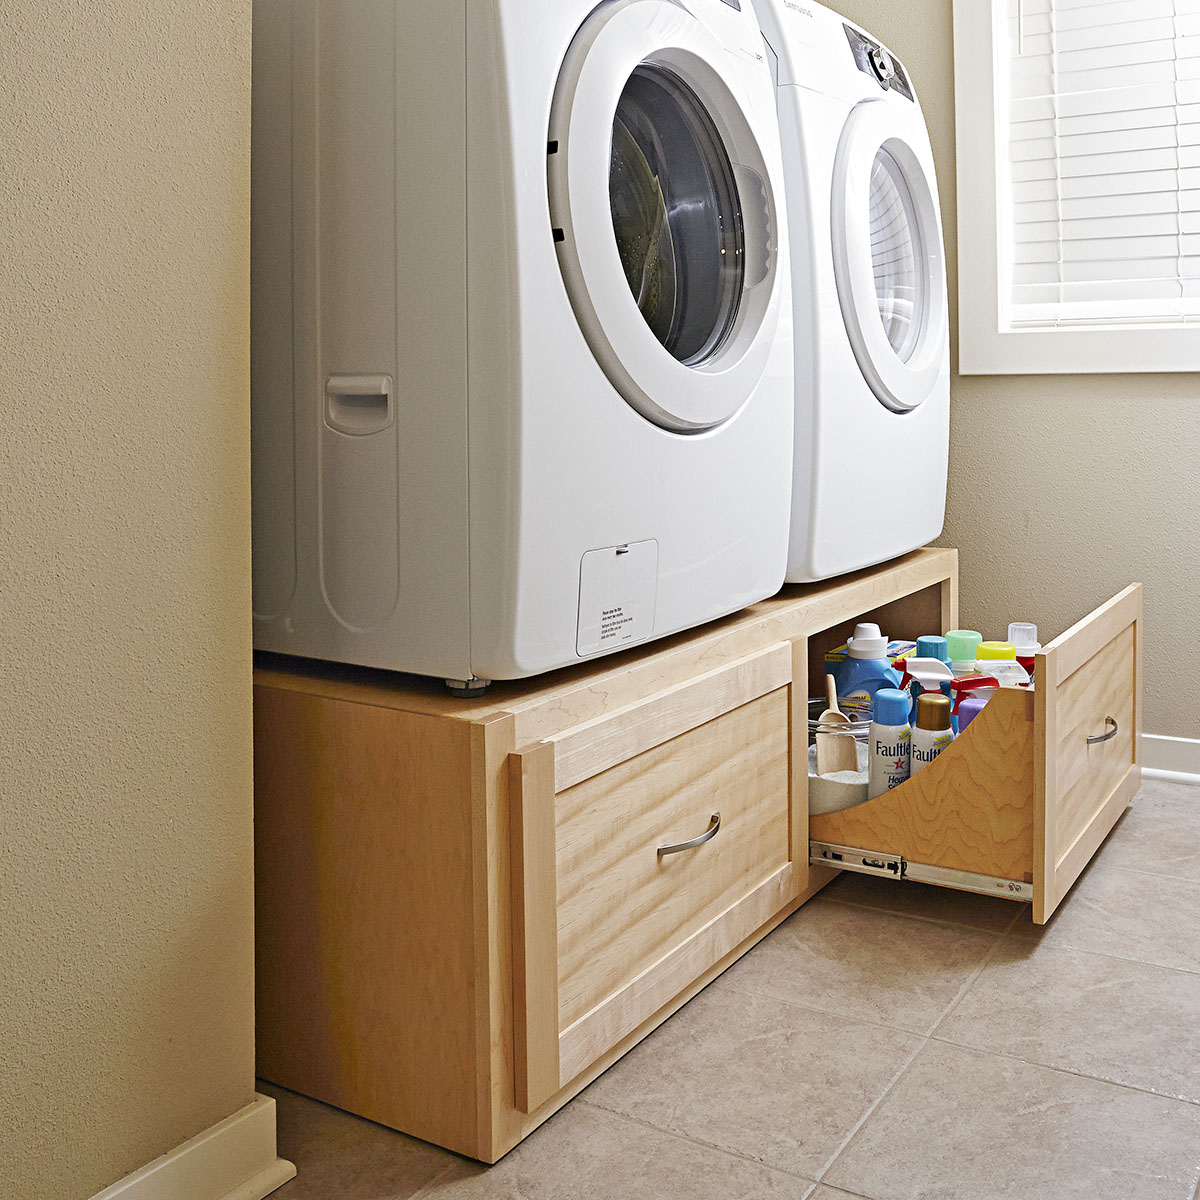 how-to-build-a-stand-for-washer-and-dryer-at-amy-obrien-blog